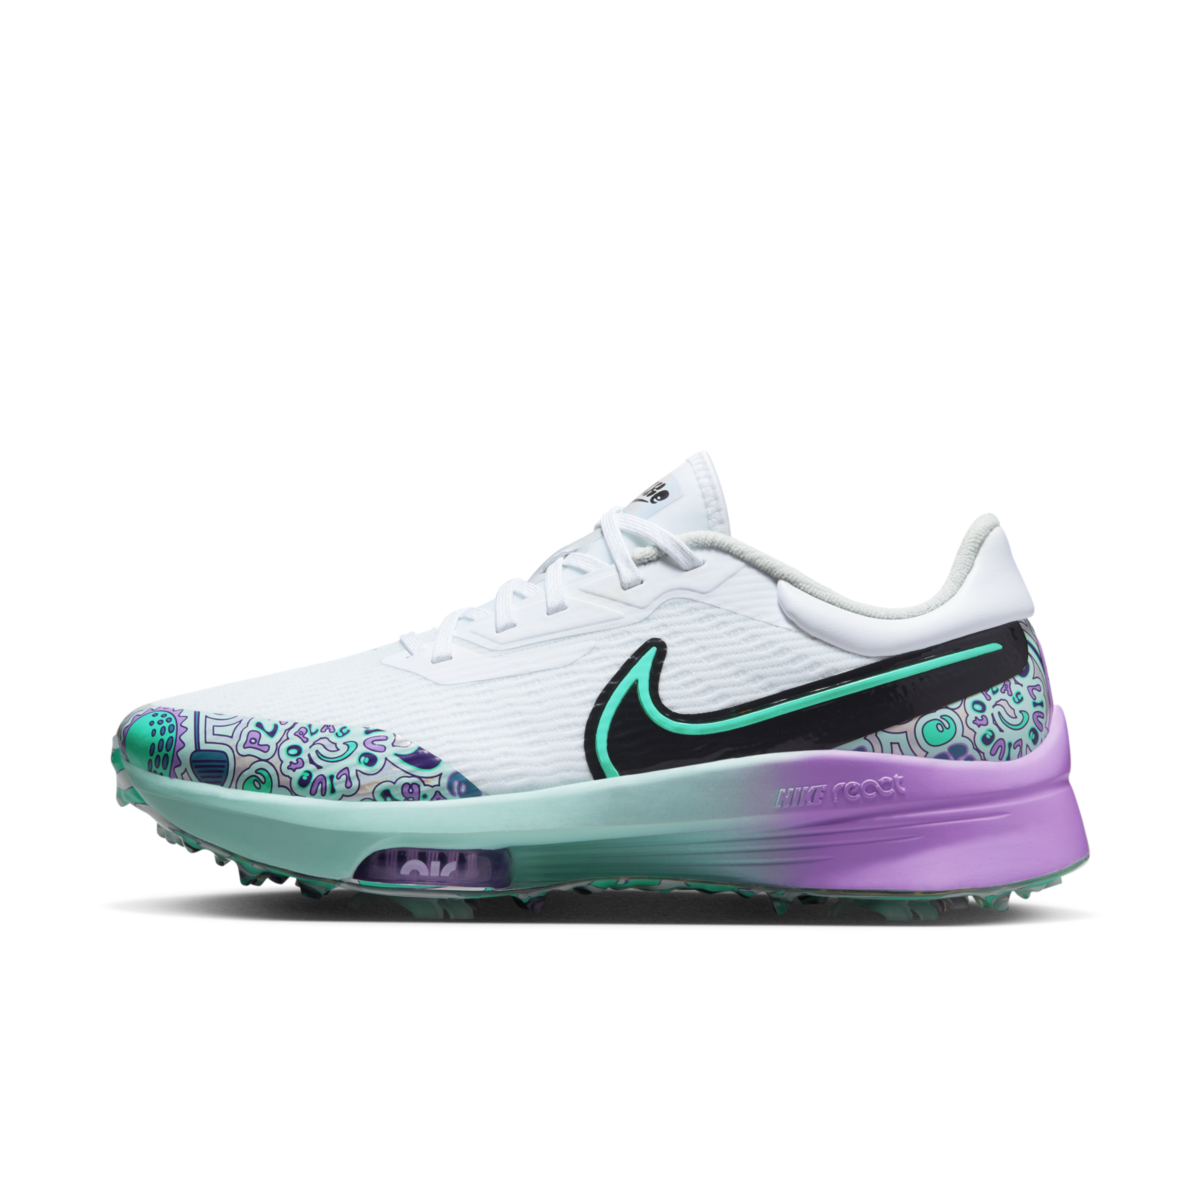 Nike Air Zoom Infinity Tour NEXT% Golf NRG 'Play To Live'